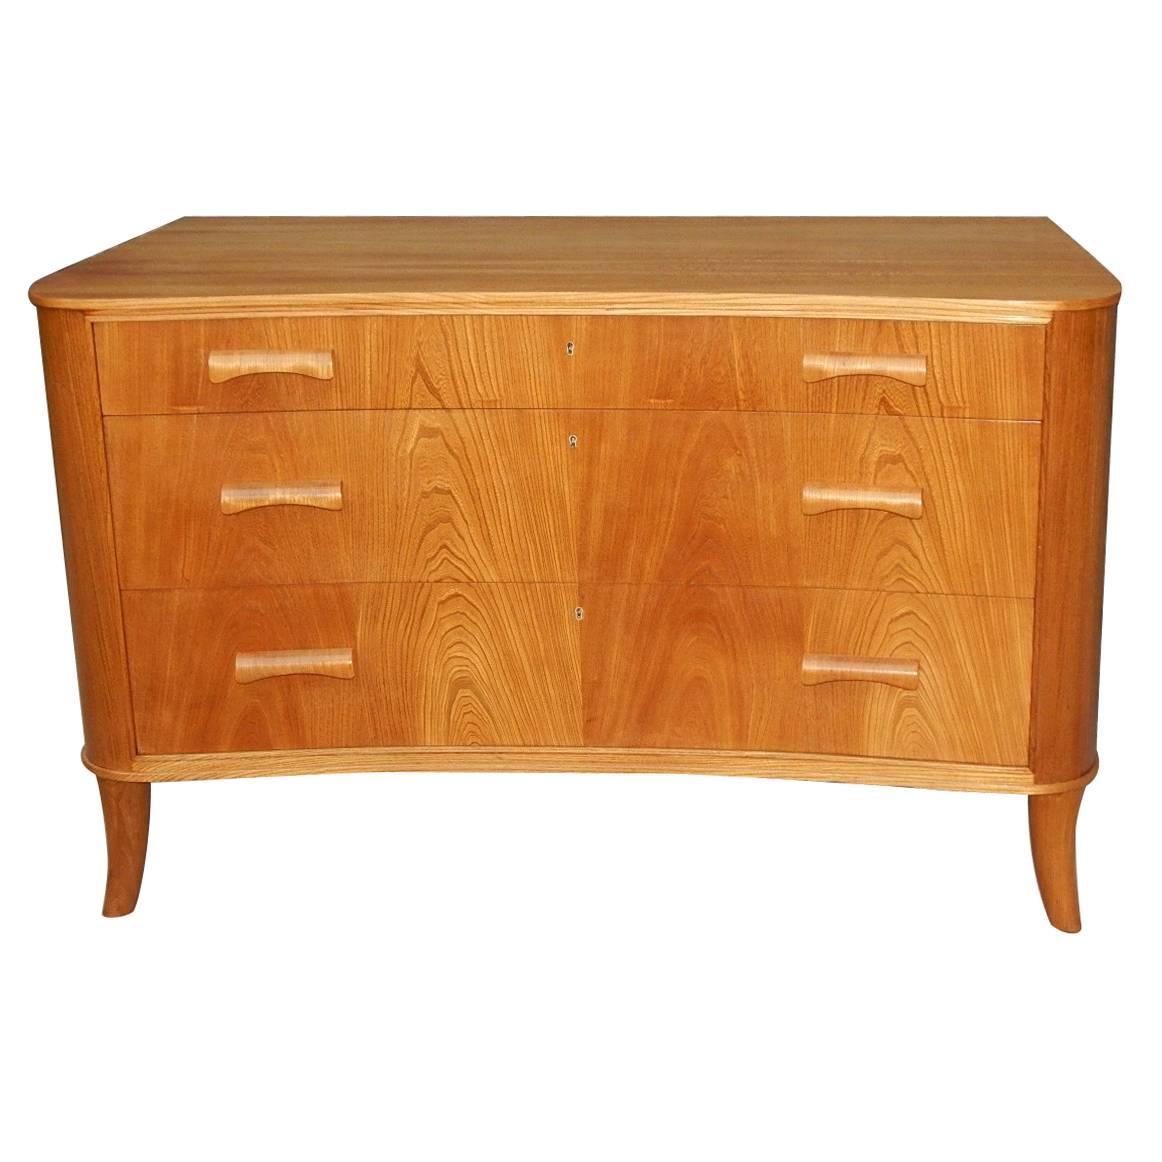 Swedish Moderne Chest of Drawers in Elm-Axel Larsson for Bodafors, circa 1940